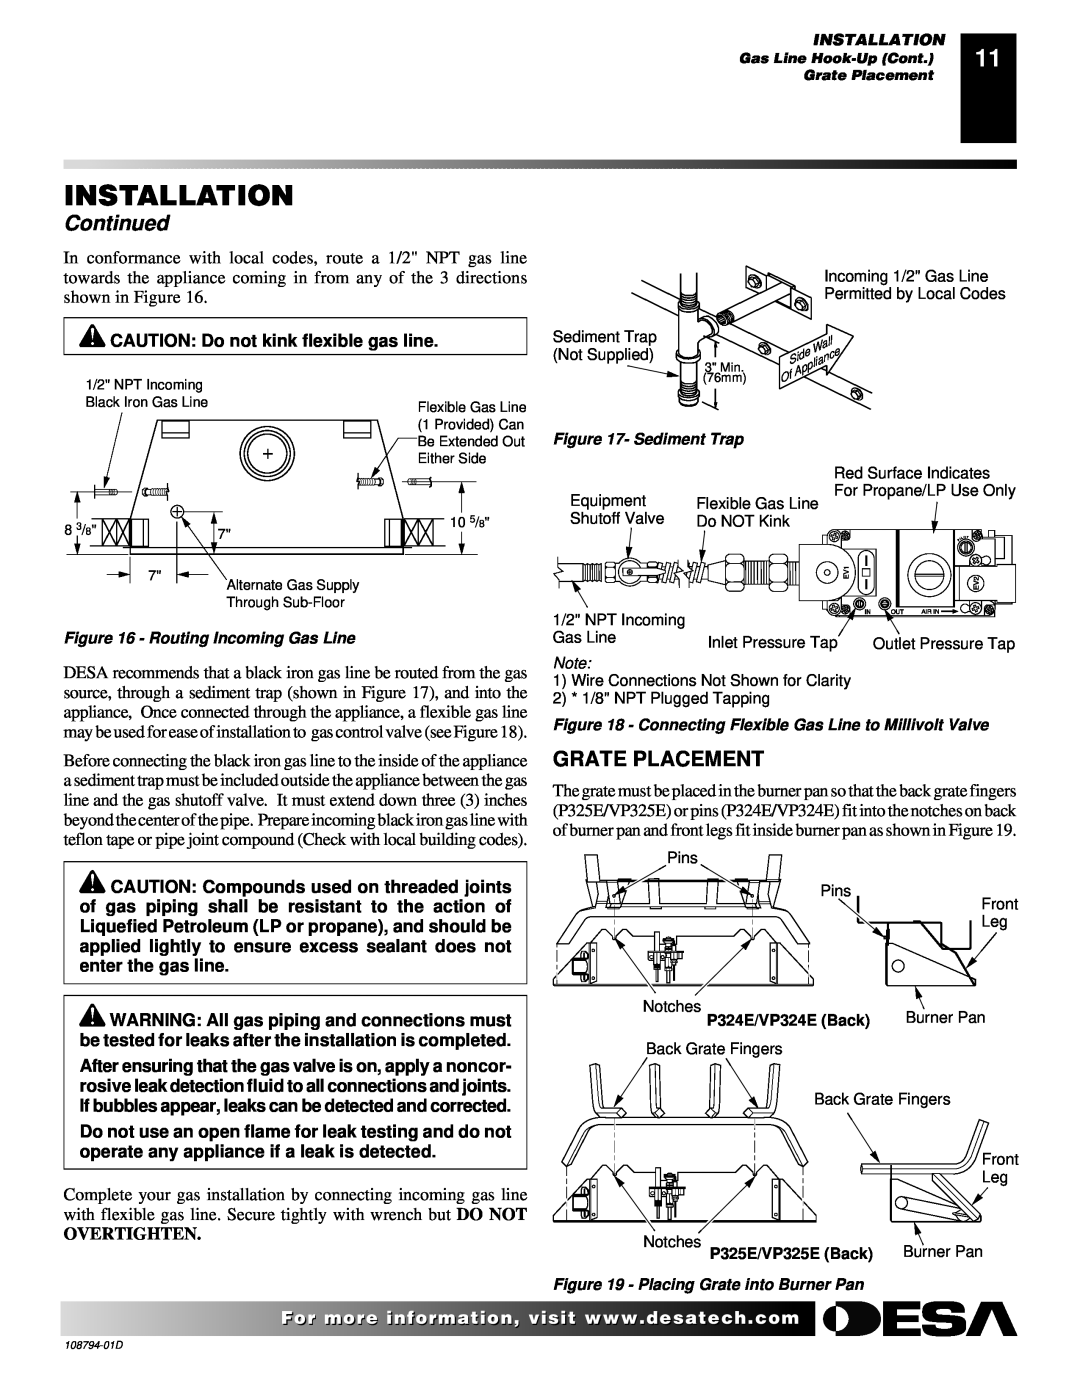 Desa VP325E(B) installation manual Installation, Continued, Grate Placement, CAUTION Do not kink flexible gas line 